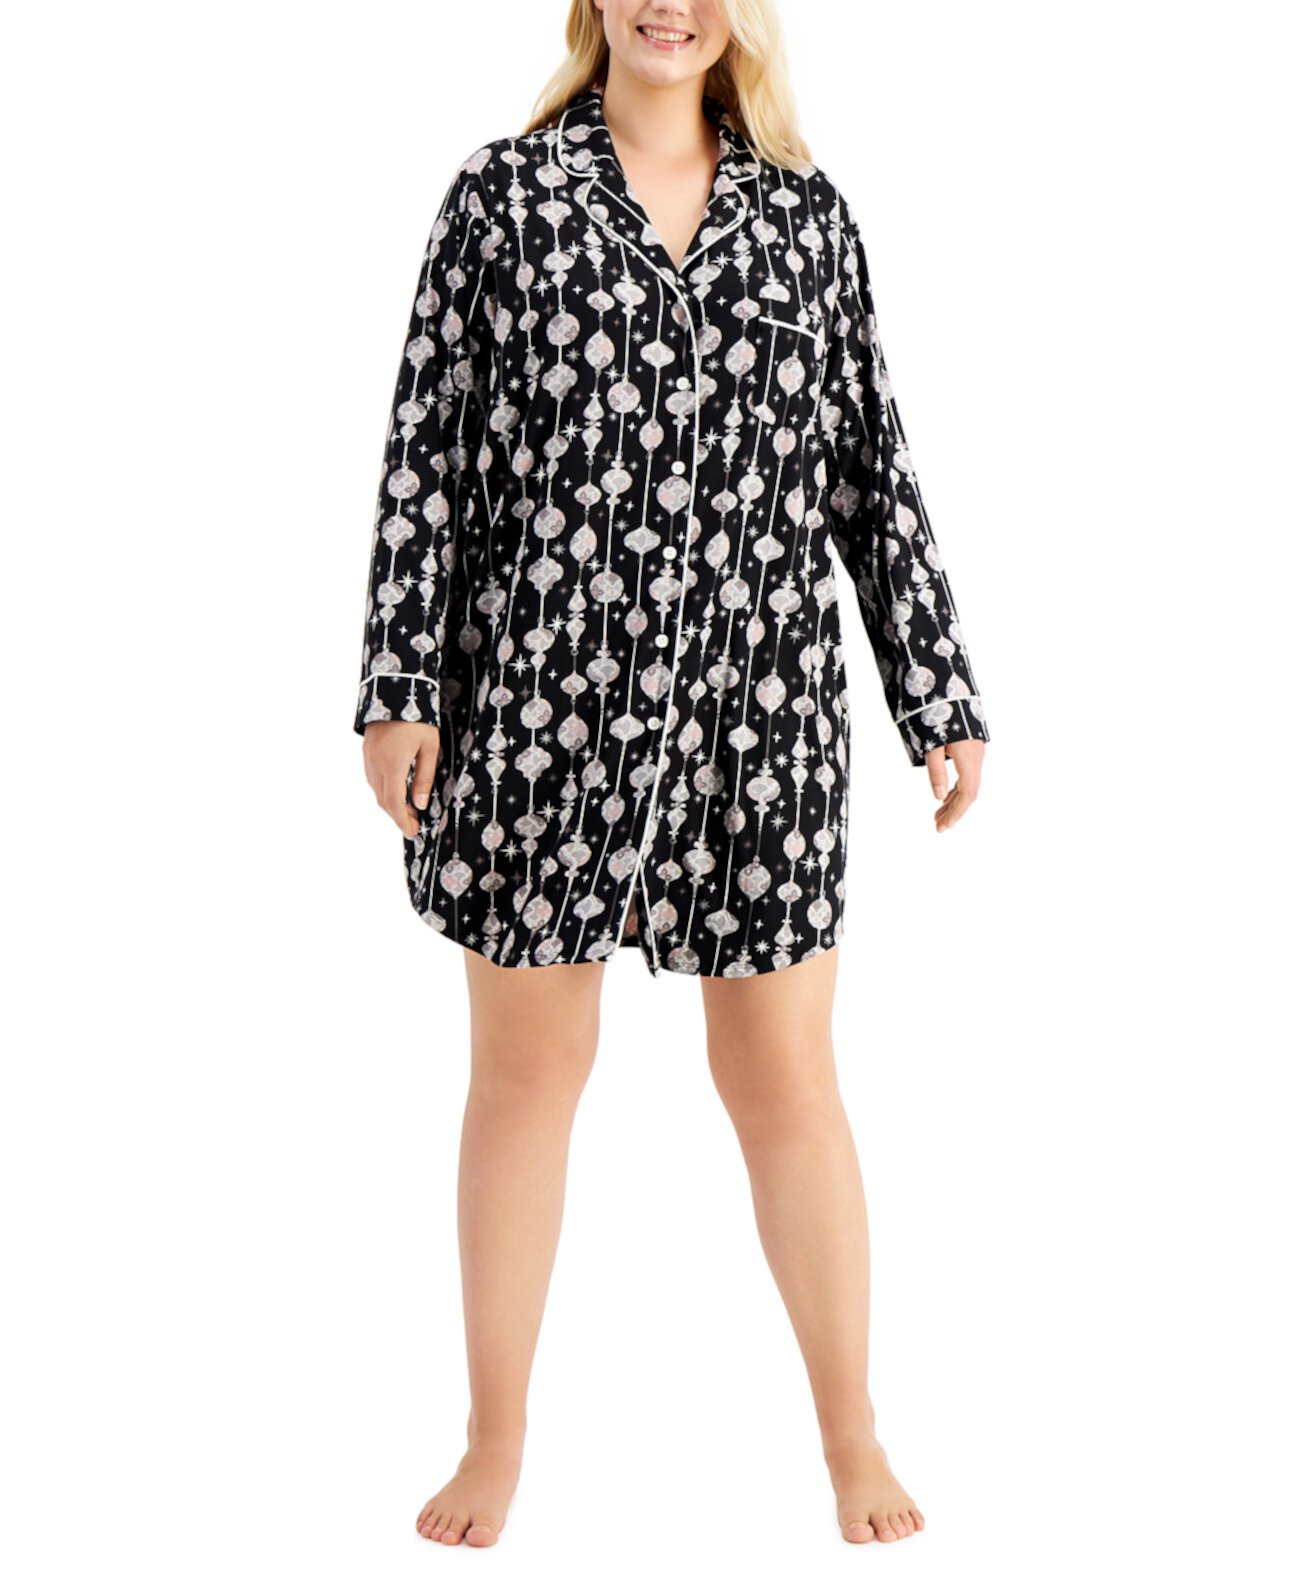 Plus Sueded Super Soft Knit Sleepshirt Nightgown, Created for Macy's Charter Club